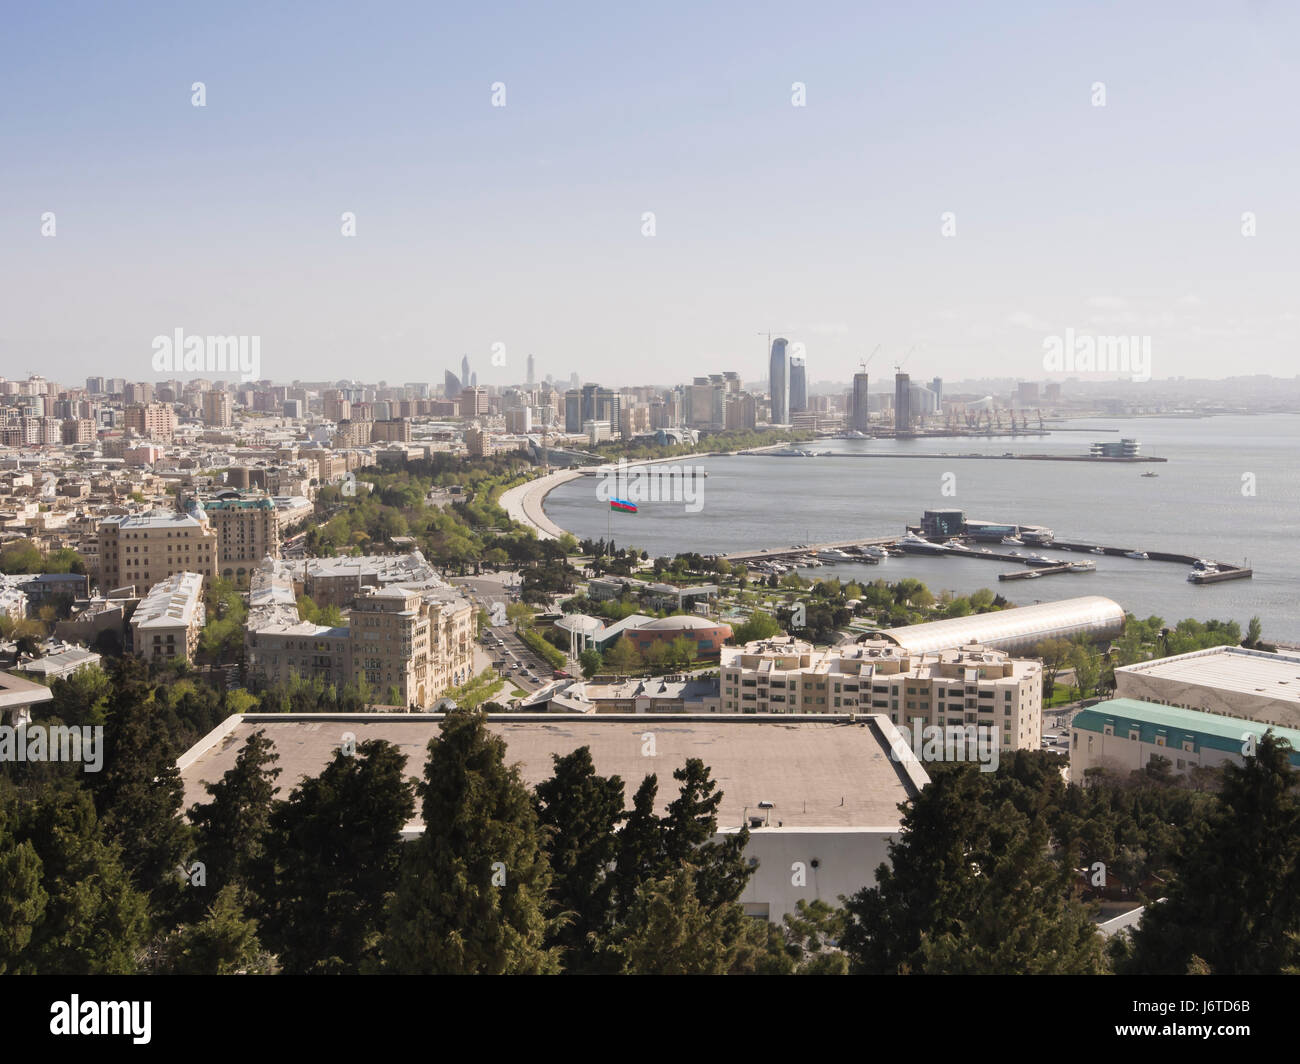 Baku, the capital city of Azerbaijan, on the shore of the Caspian sea, view of the city centre and seaside promenade from the Dagustu park Stock Photo